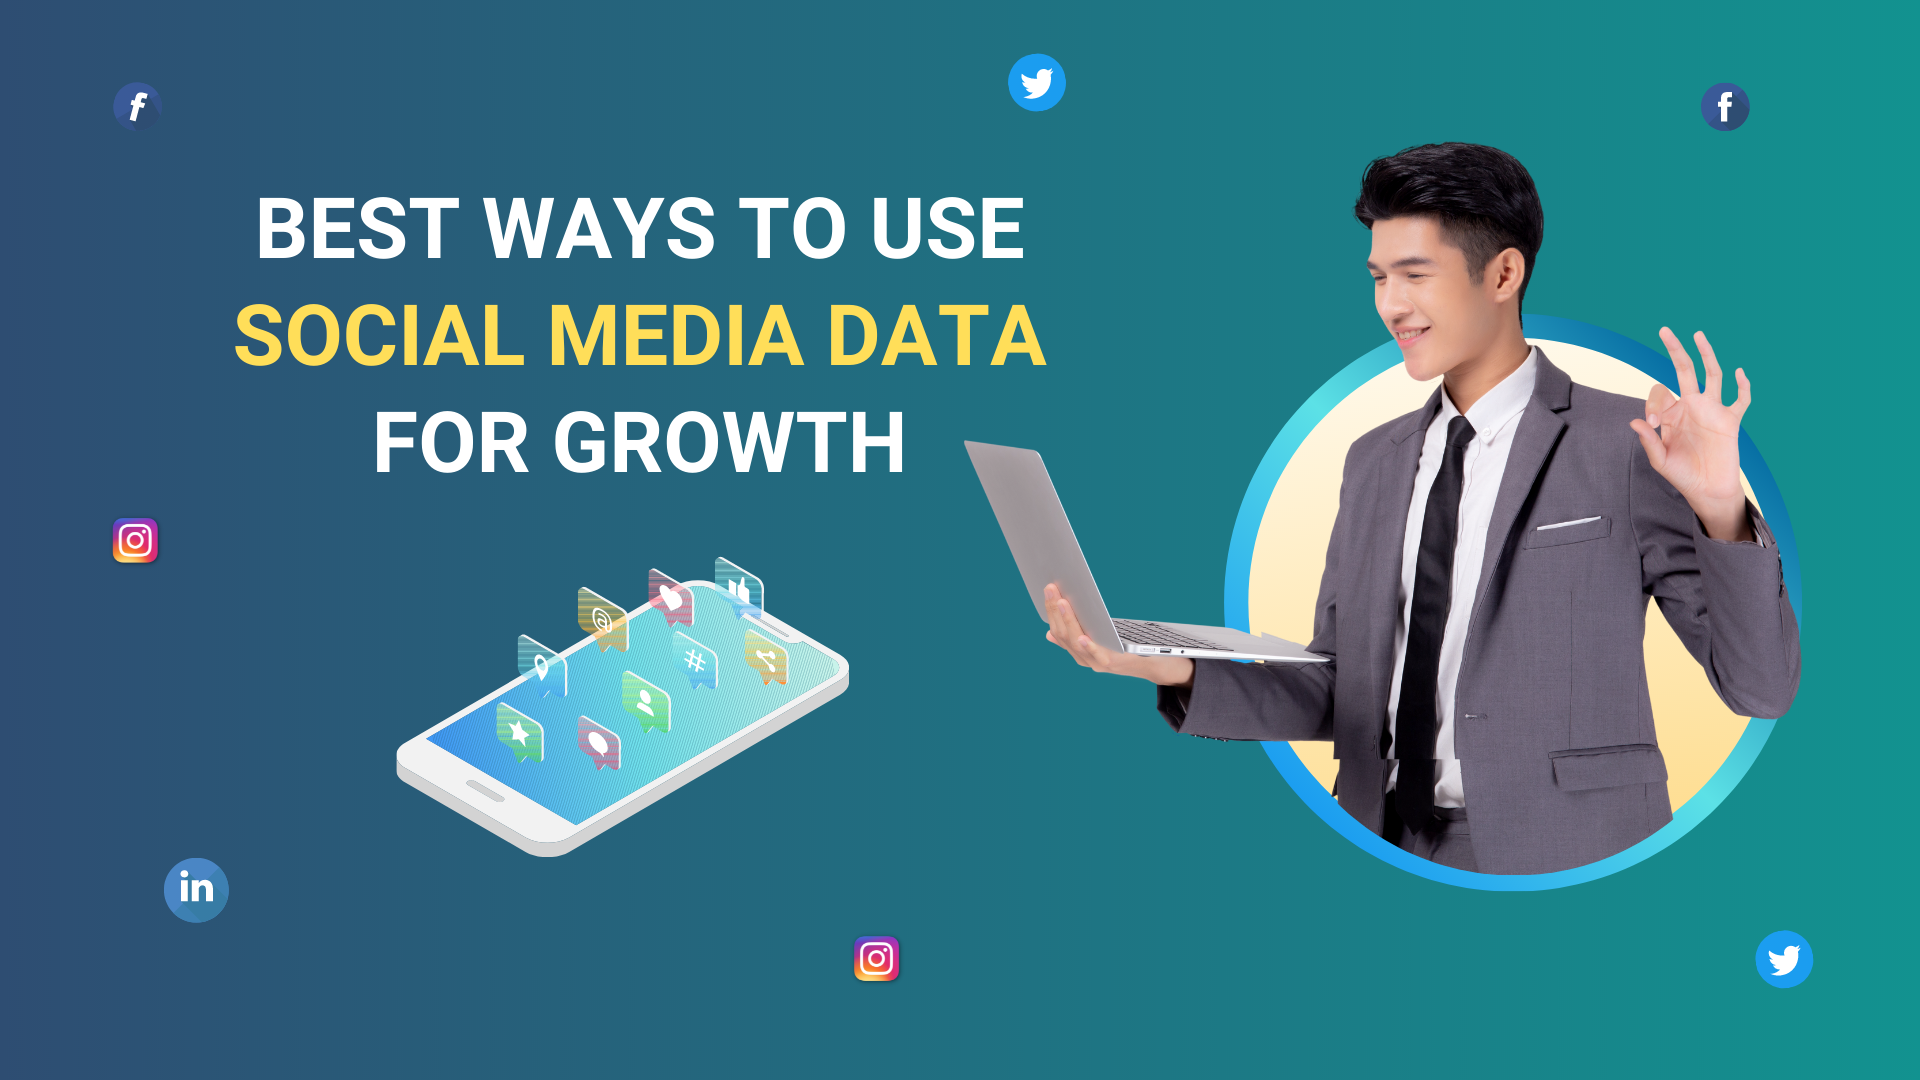 Best Ways To Use Social Media Data That You Might Have Overlooked